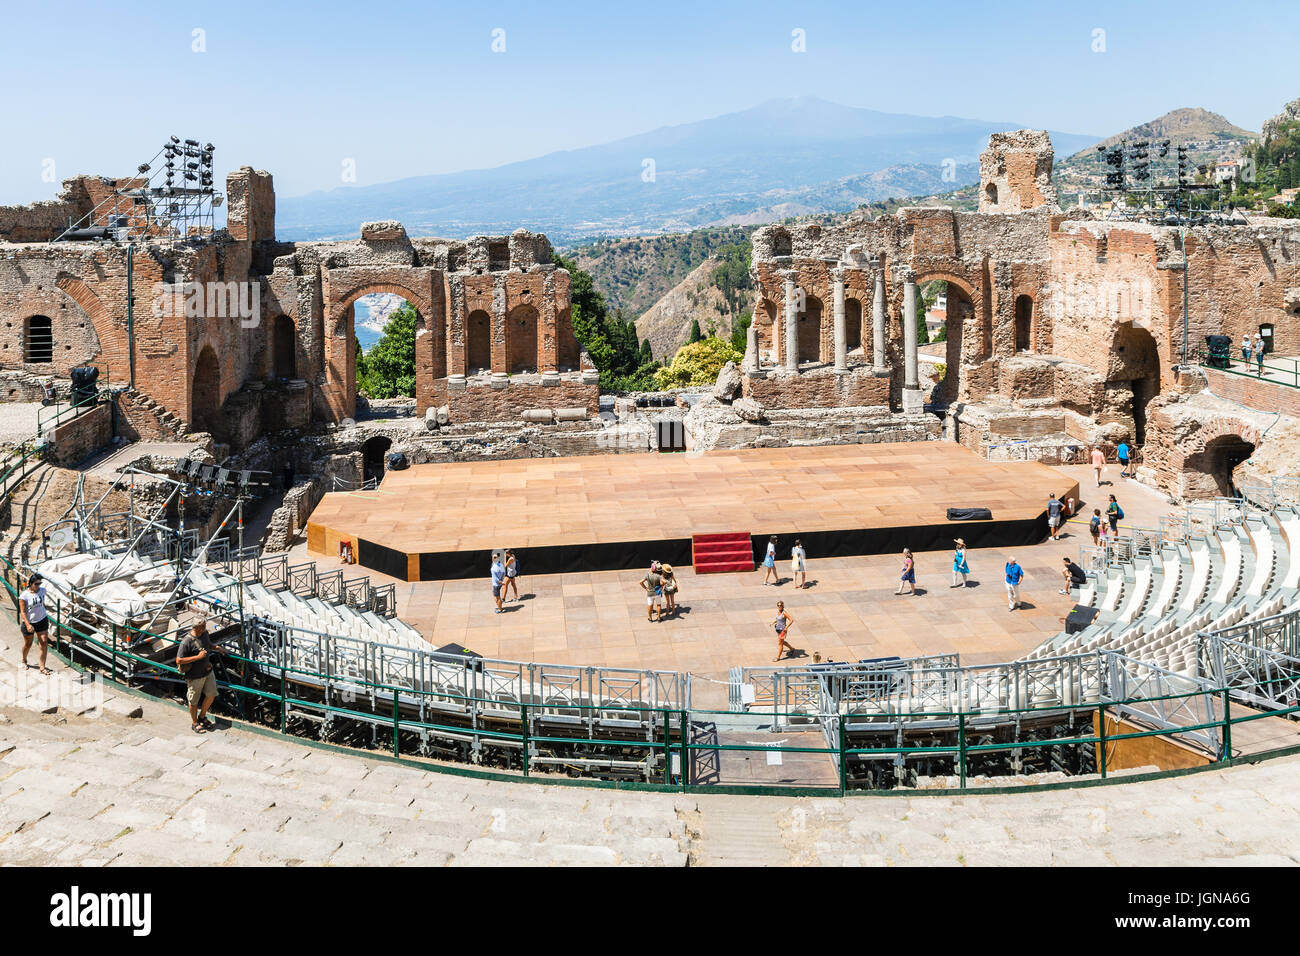 TAORMINA, ITALY - JUNE 29, 2017: tourists in Teatro antico di Taormina, ancient Greek Theater (Teatro Greco) and view of Etna mount in summer day. The Stock Photo